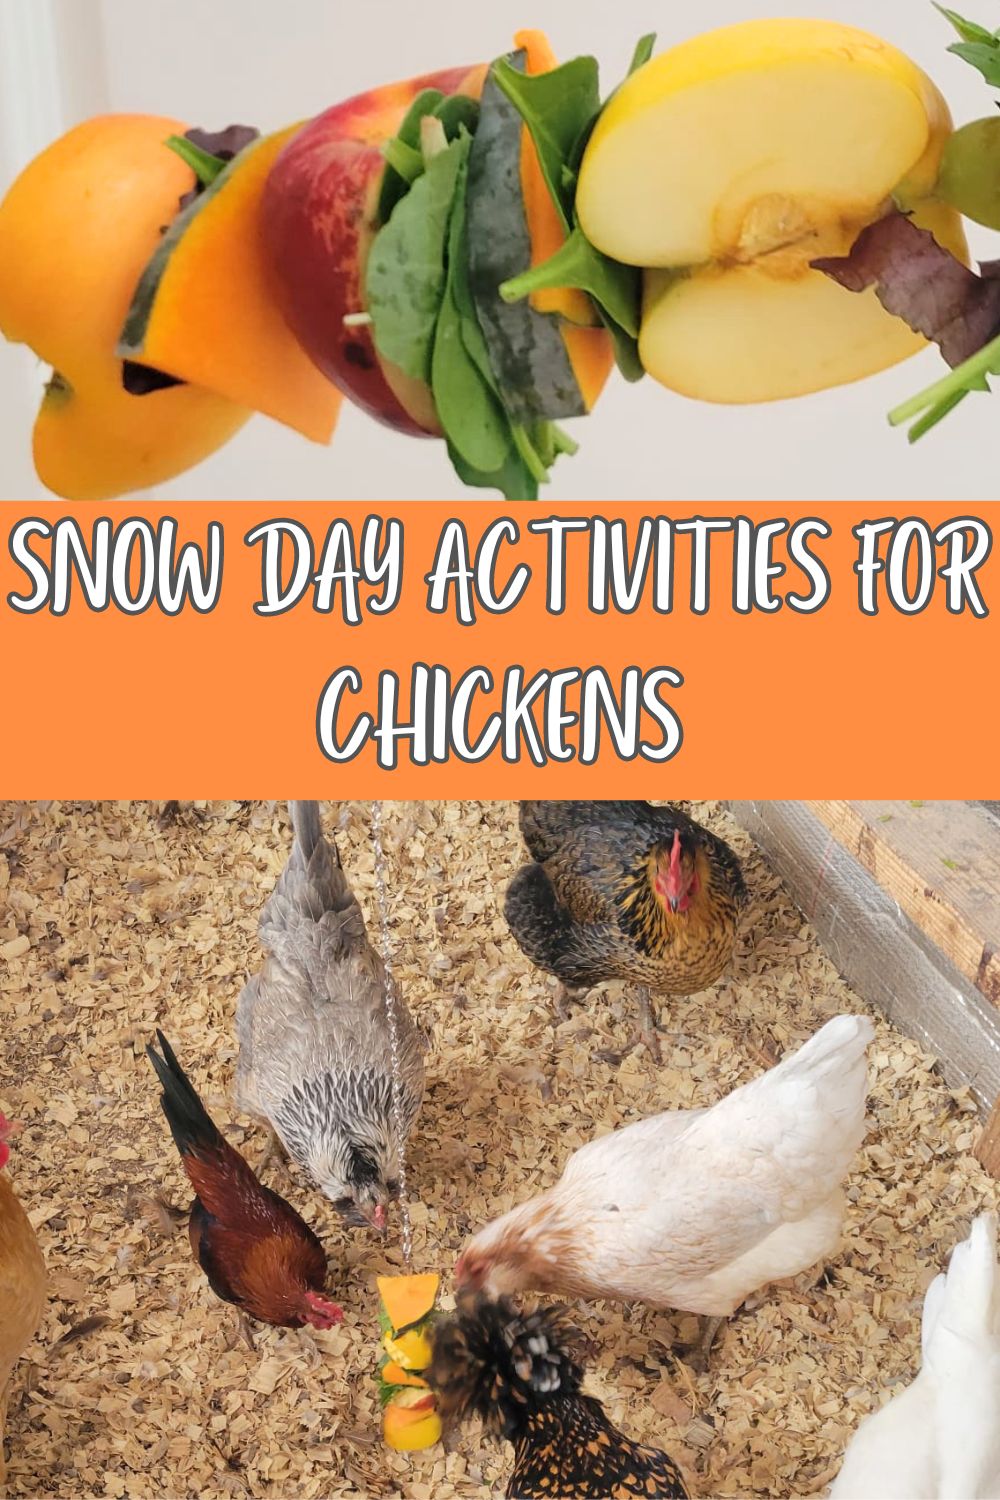 Snow day activities for chickens.